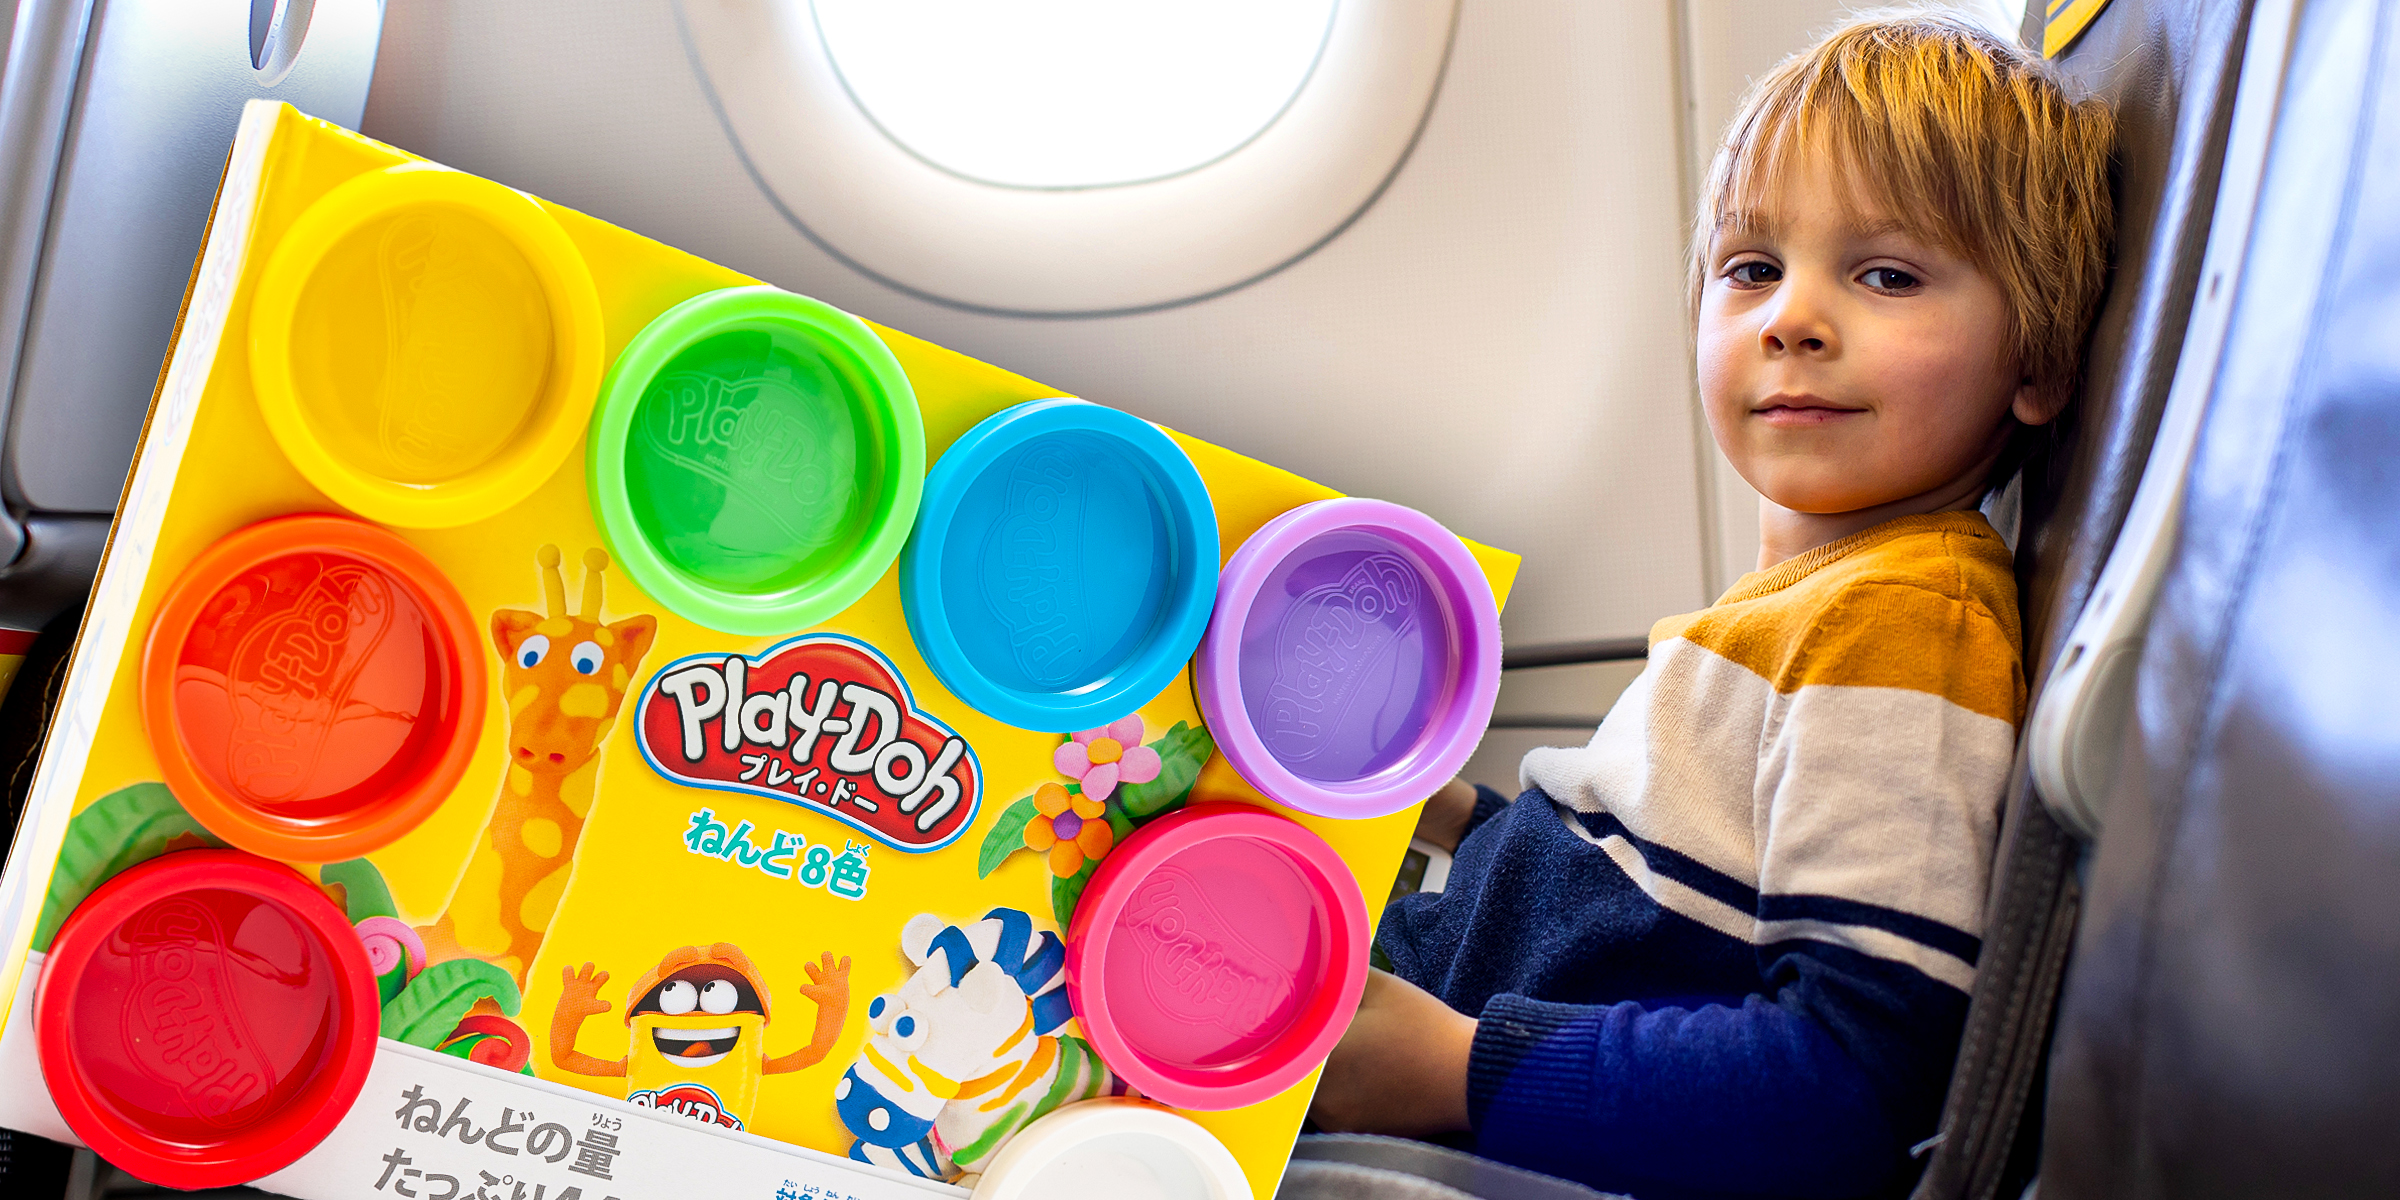 A Play-Doh | A child on the plane | Source: Shutterstock